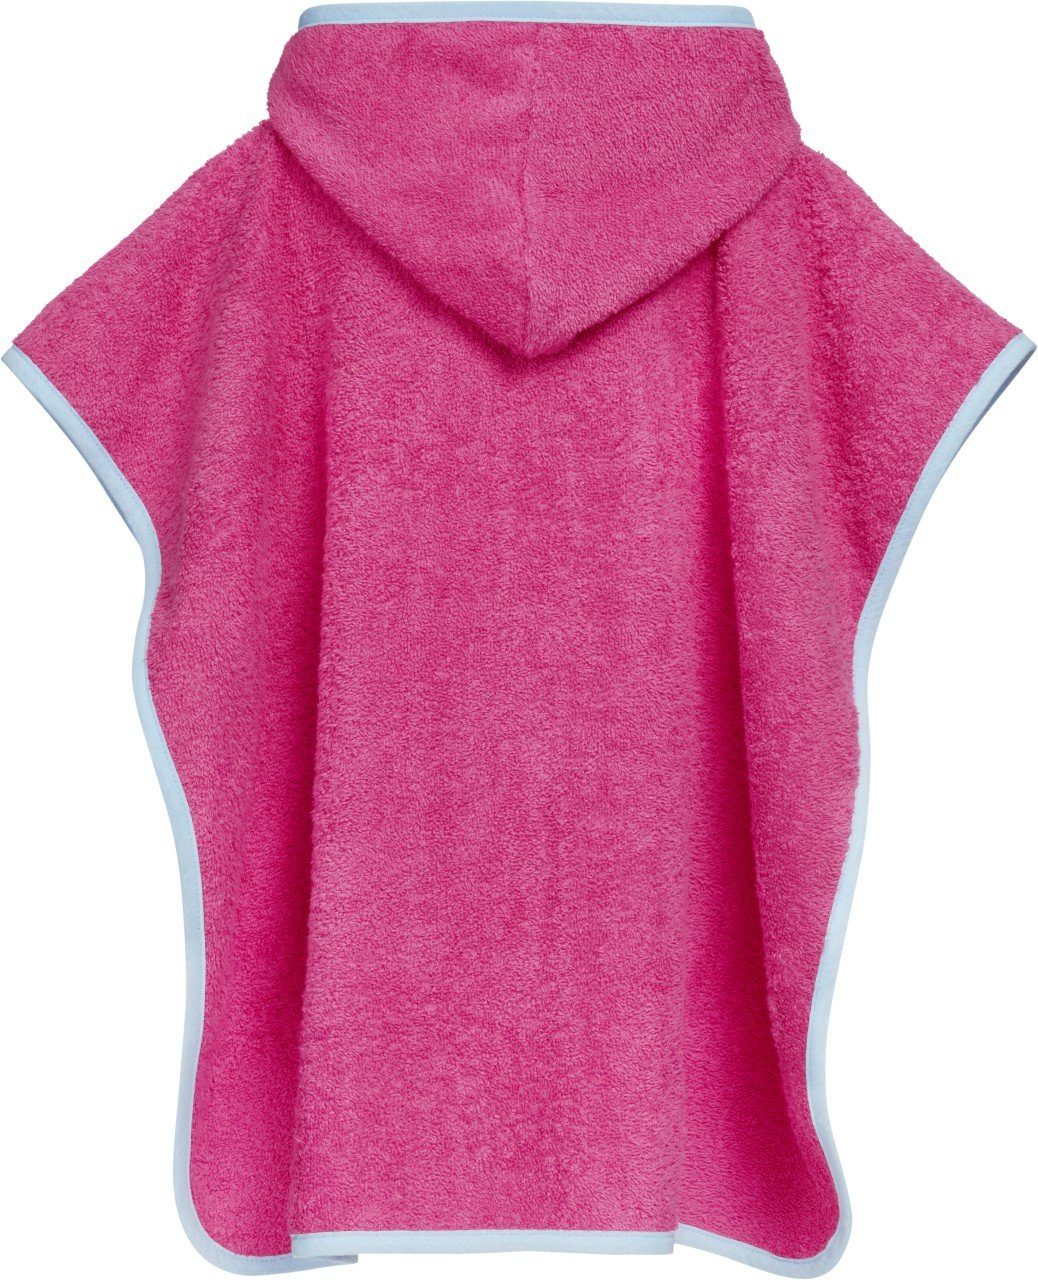 Playshoes Badeponcho Frottee-Poncho Flamingo, Badeponcho aus flauschigem  und saugfähigem Frottee